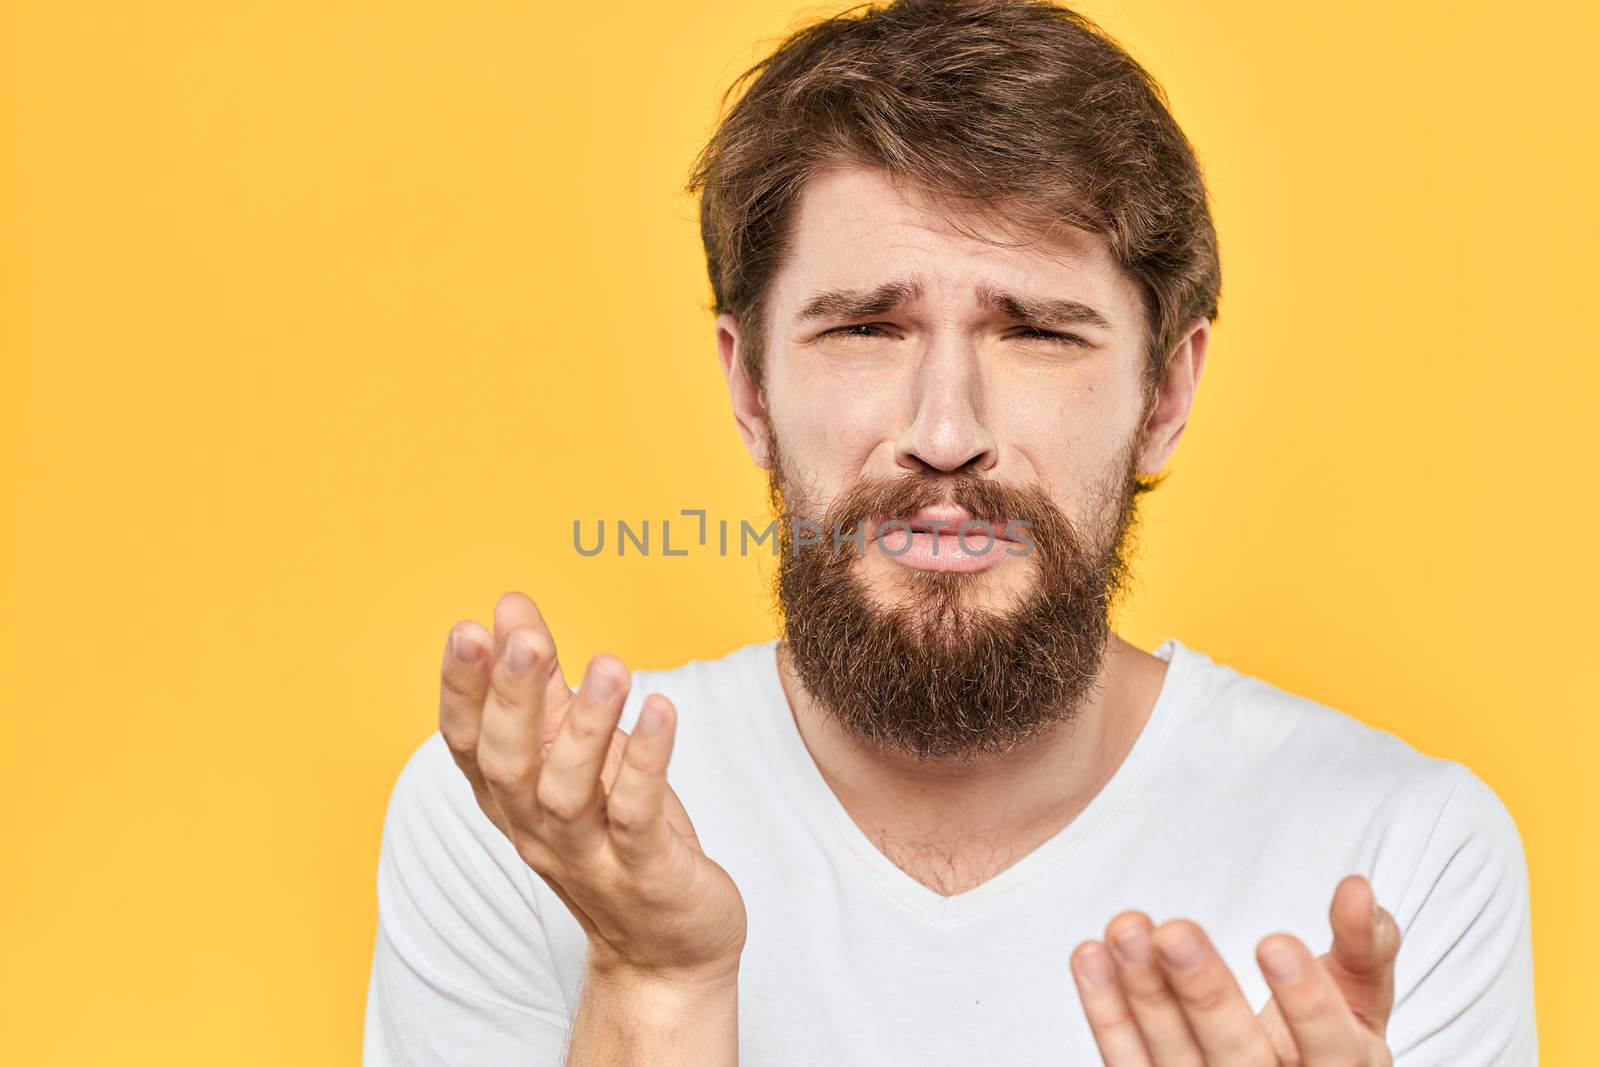 Bearded man emotions gestures with hands facial expression white t-shirt yellow background by SHOTPRIME